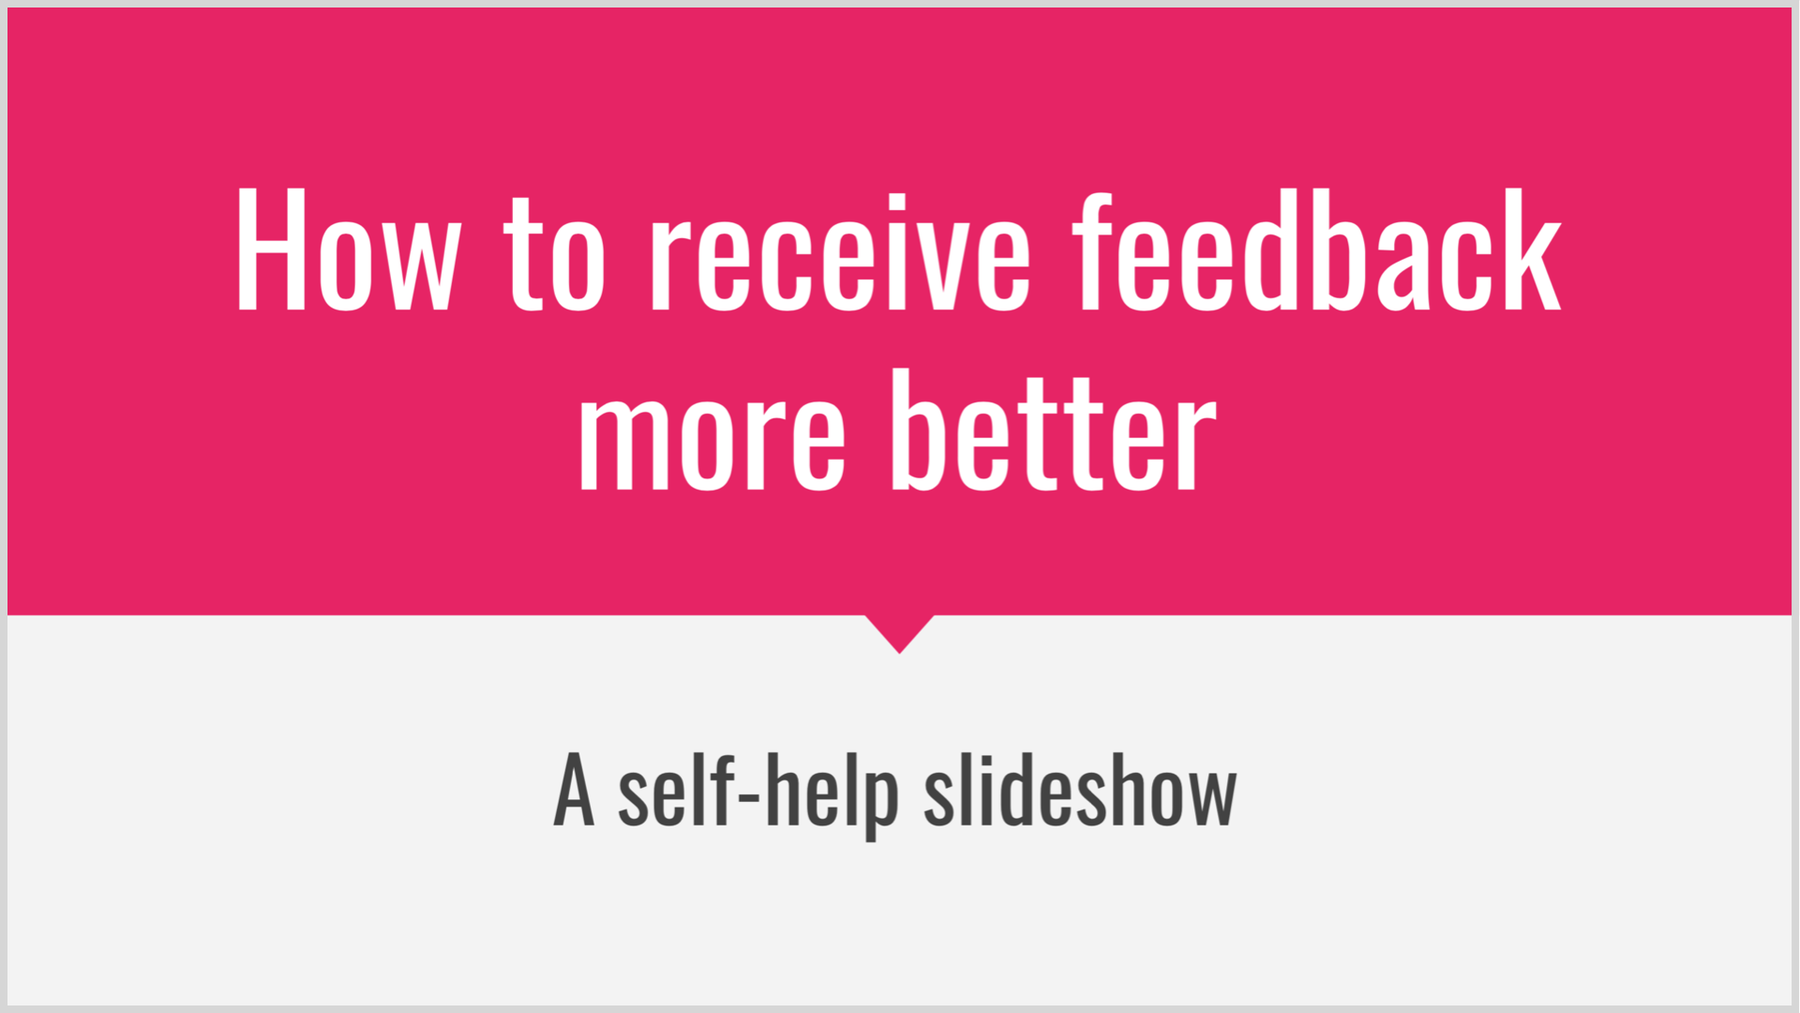 How to receive feedback more better / A self-help slideshow